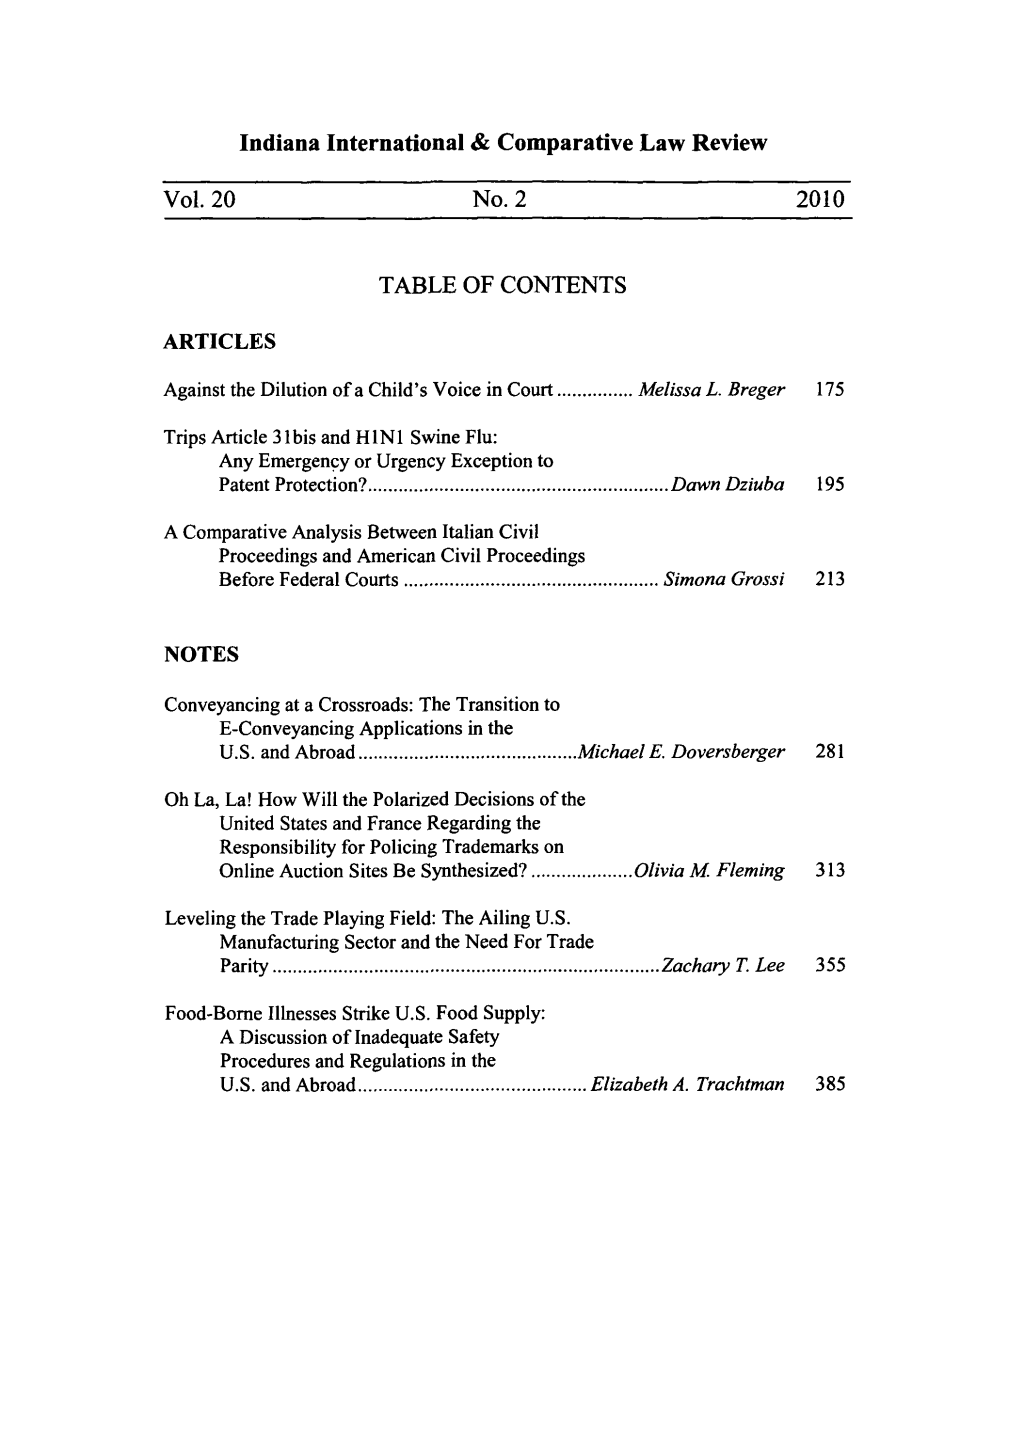 Indiana International & Comparative Law Review Vol. 20 No. 2 2010